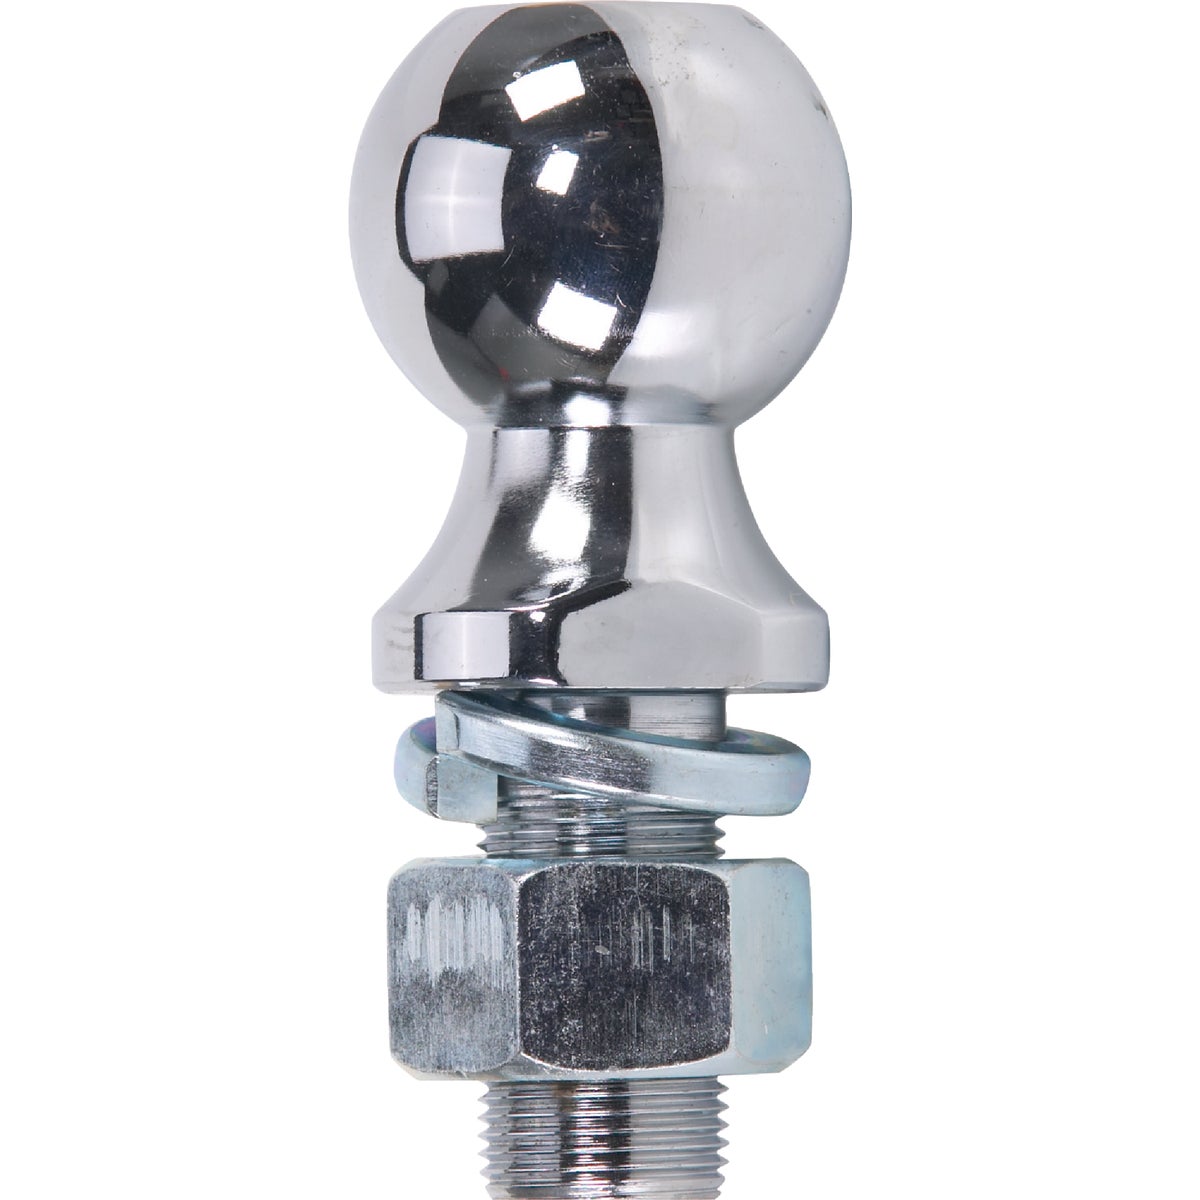 Reese Towpower 2 In. x 1 In. x 2 In. Hitch Ball